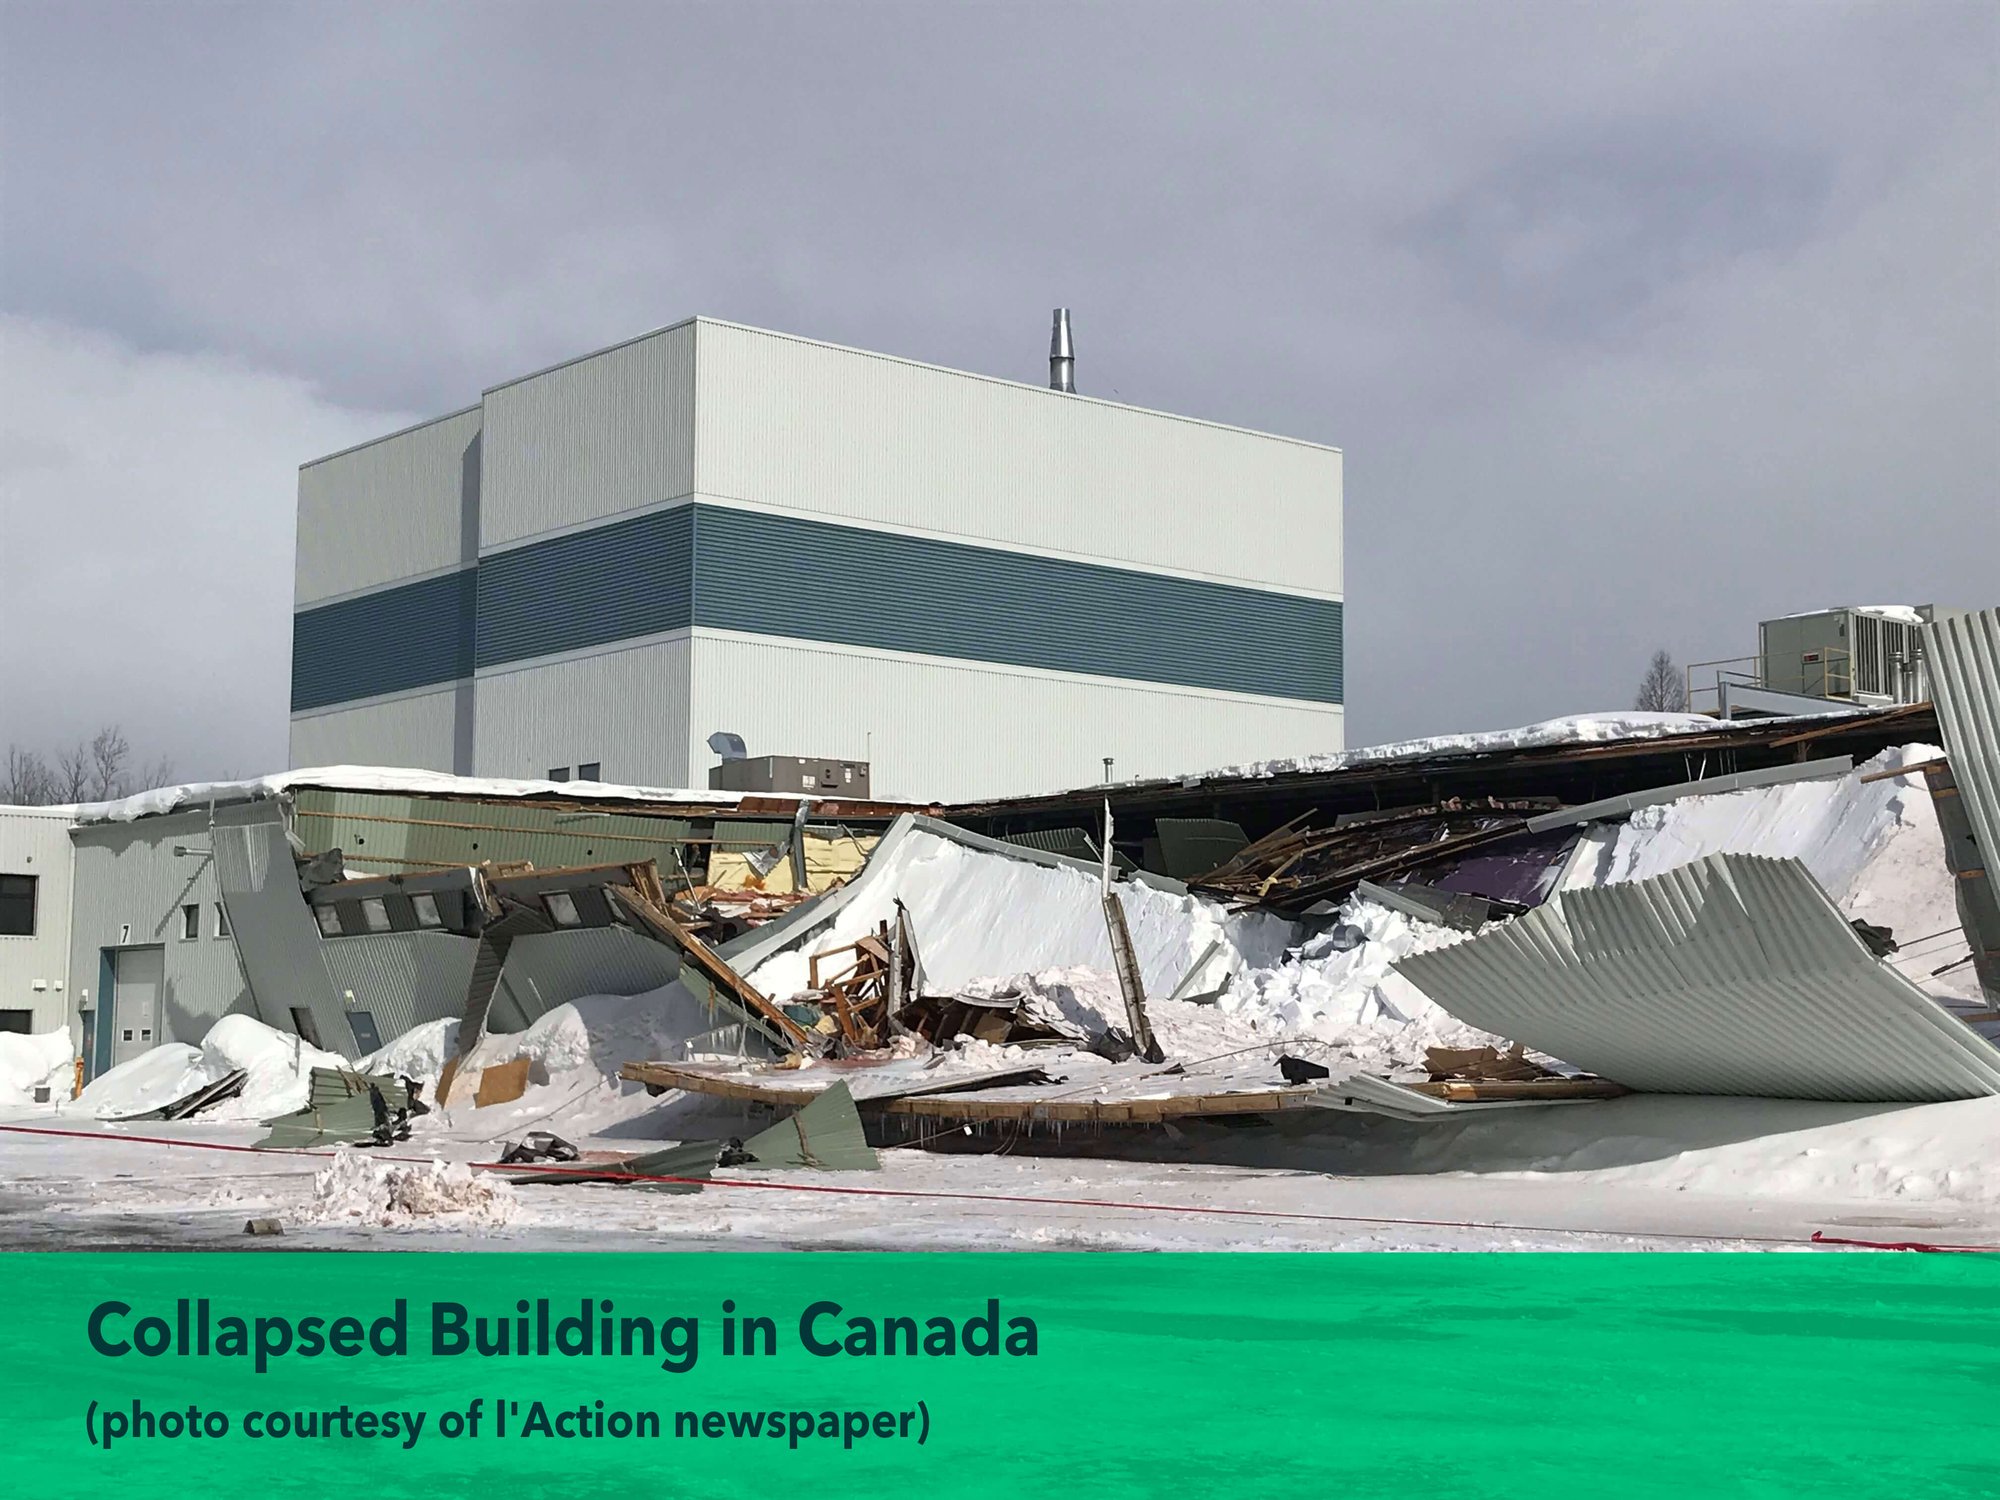 tensio-collapsed-building-canada-photo-courtesy-laction-newspaper-en